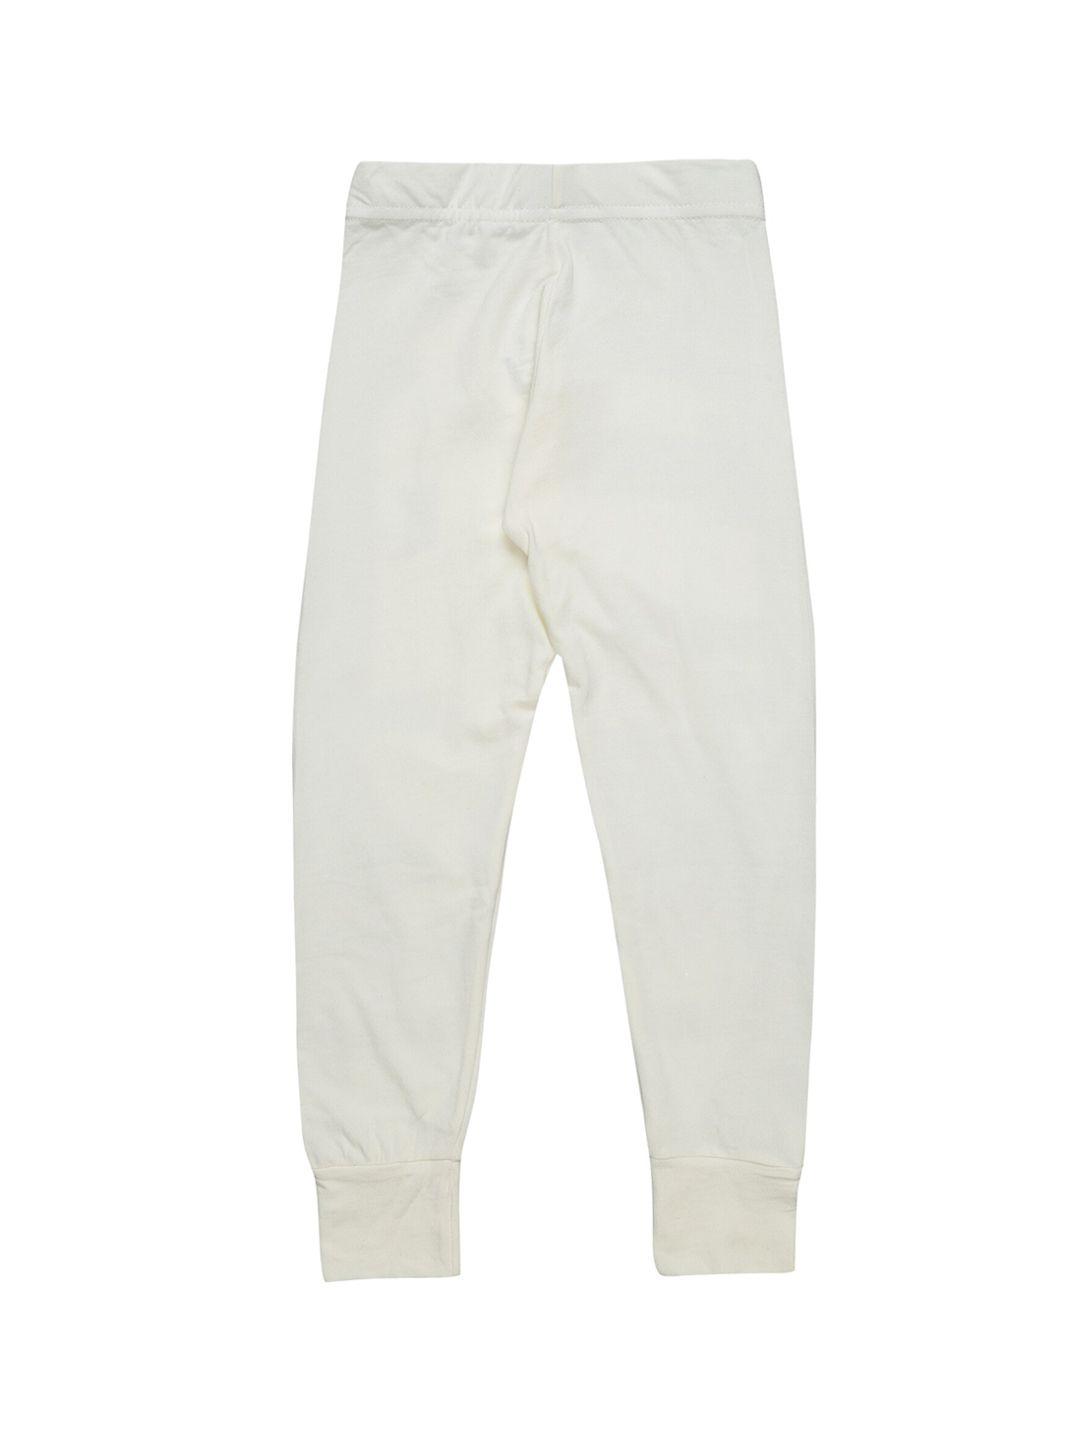 bodycare insider kids off white solid cotton thermal bottom